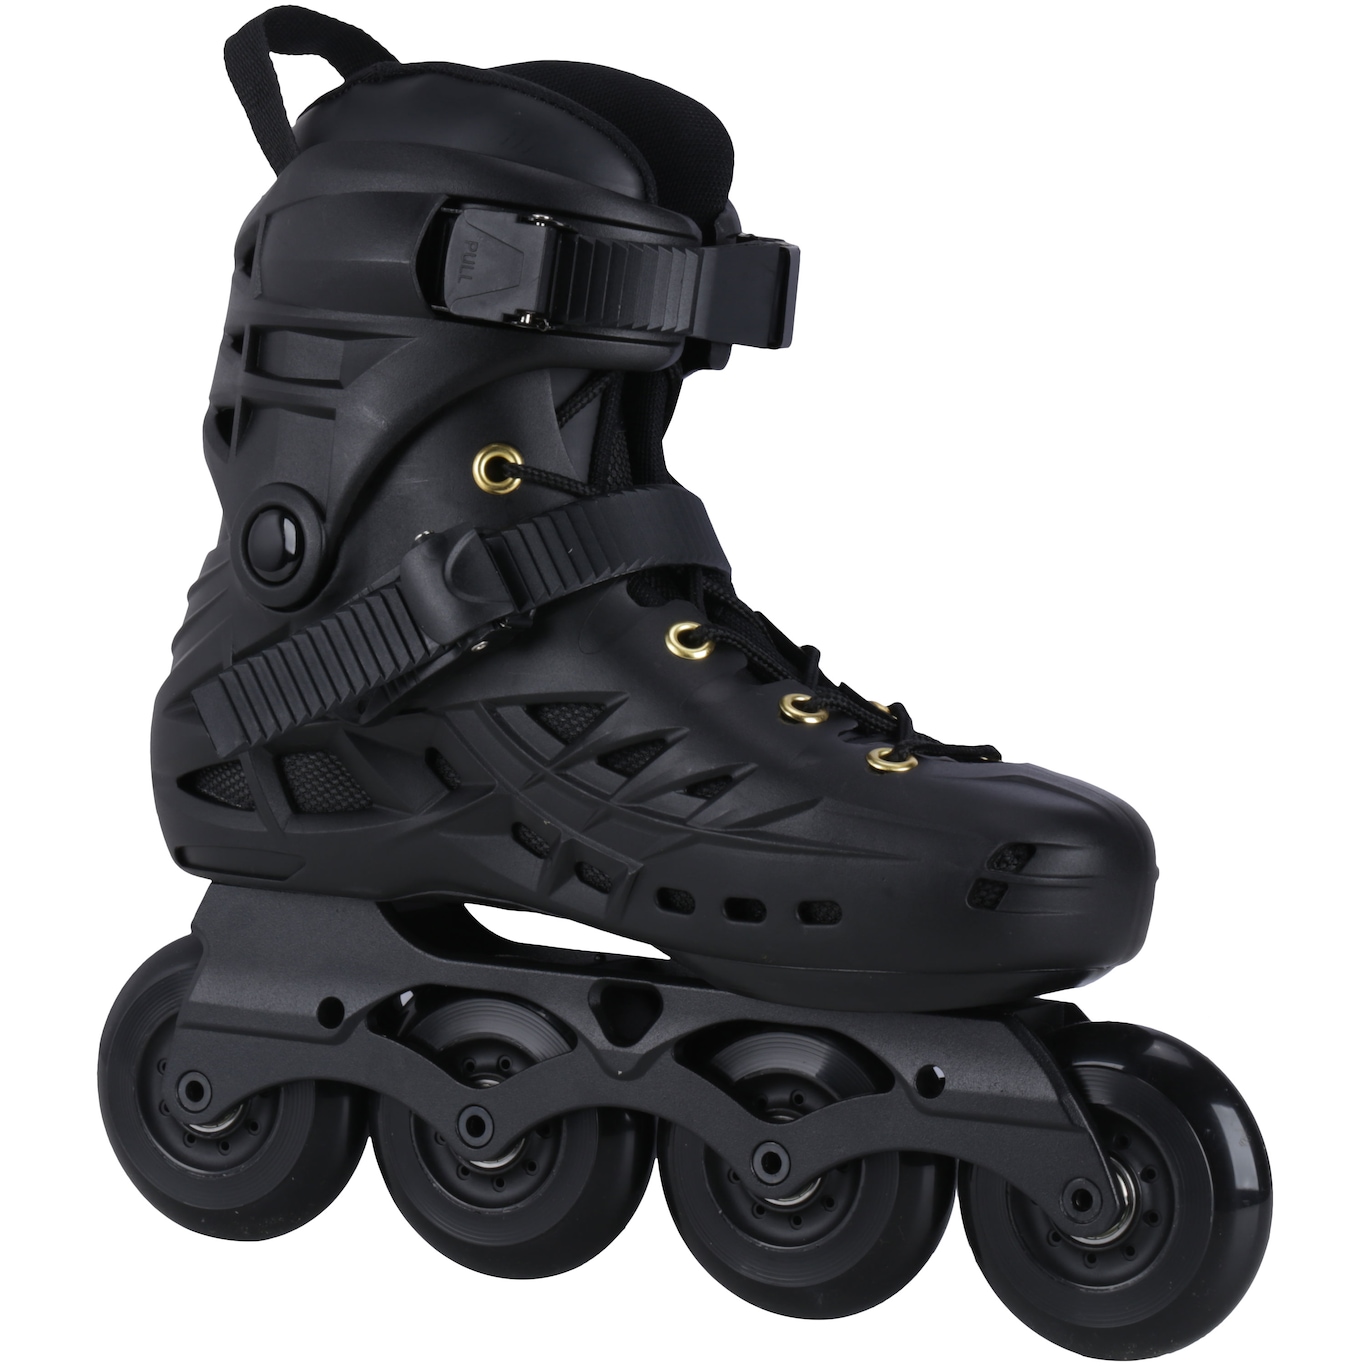 Patins Oxer Darkness Gold - In Line - Freestyle - ABEC 7 - Base de Alumínio - Adulto - Foto 2